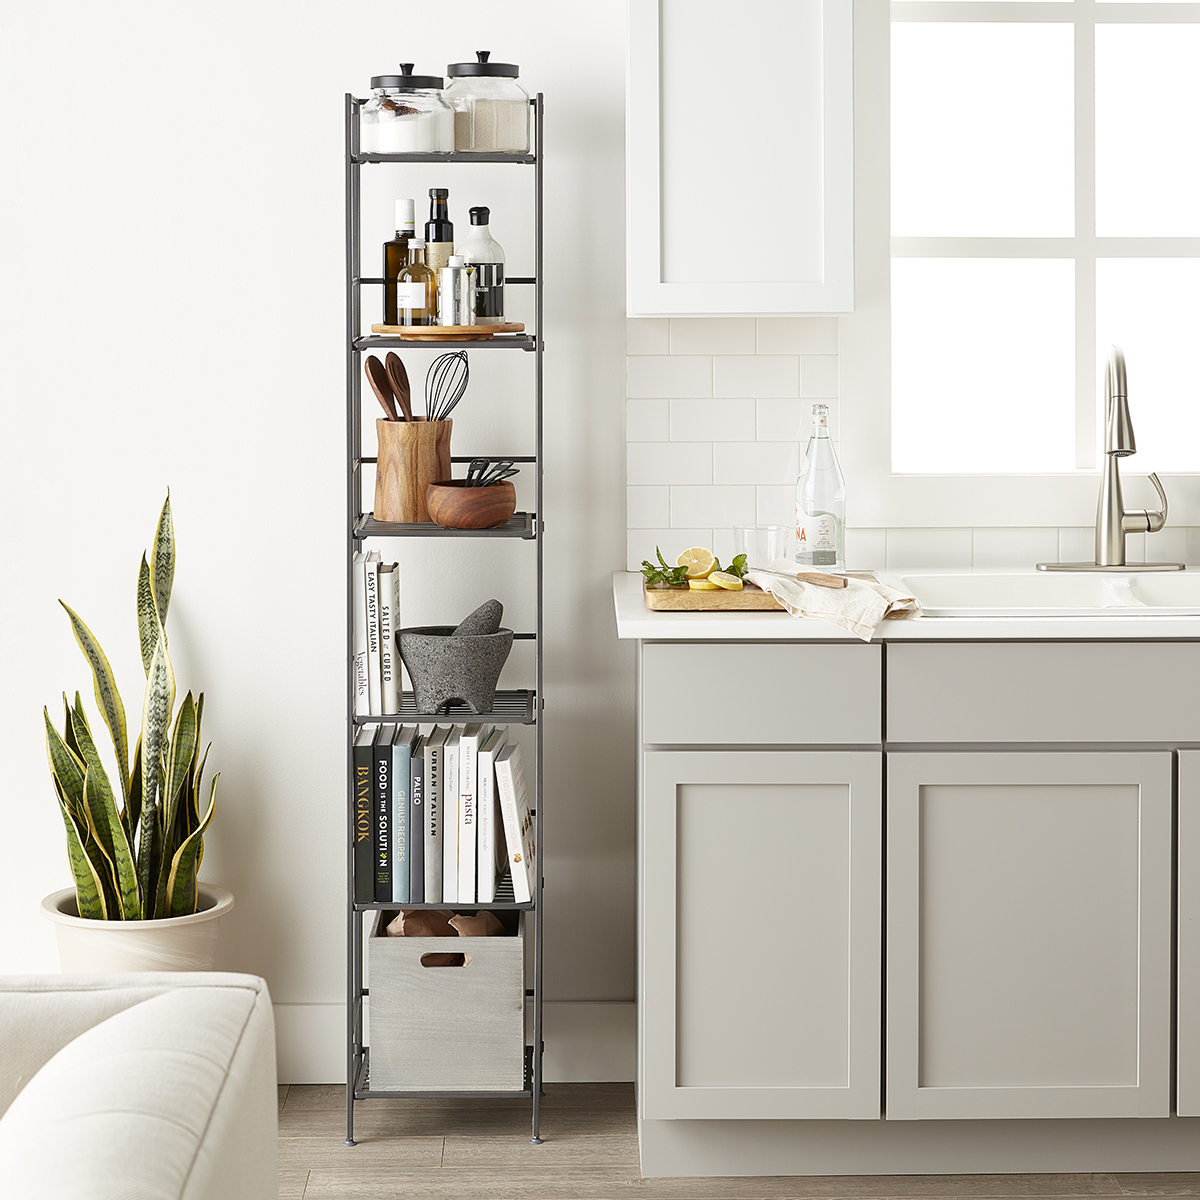 https://www.containerstore.com/catalogimages/433976/10013565_6-shelf_Iron_folding_tower_.jpg